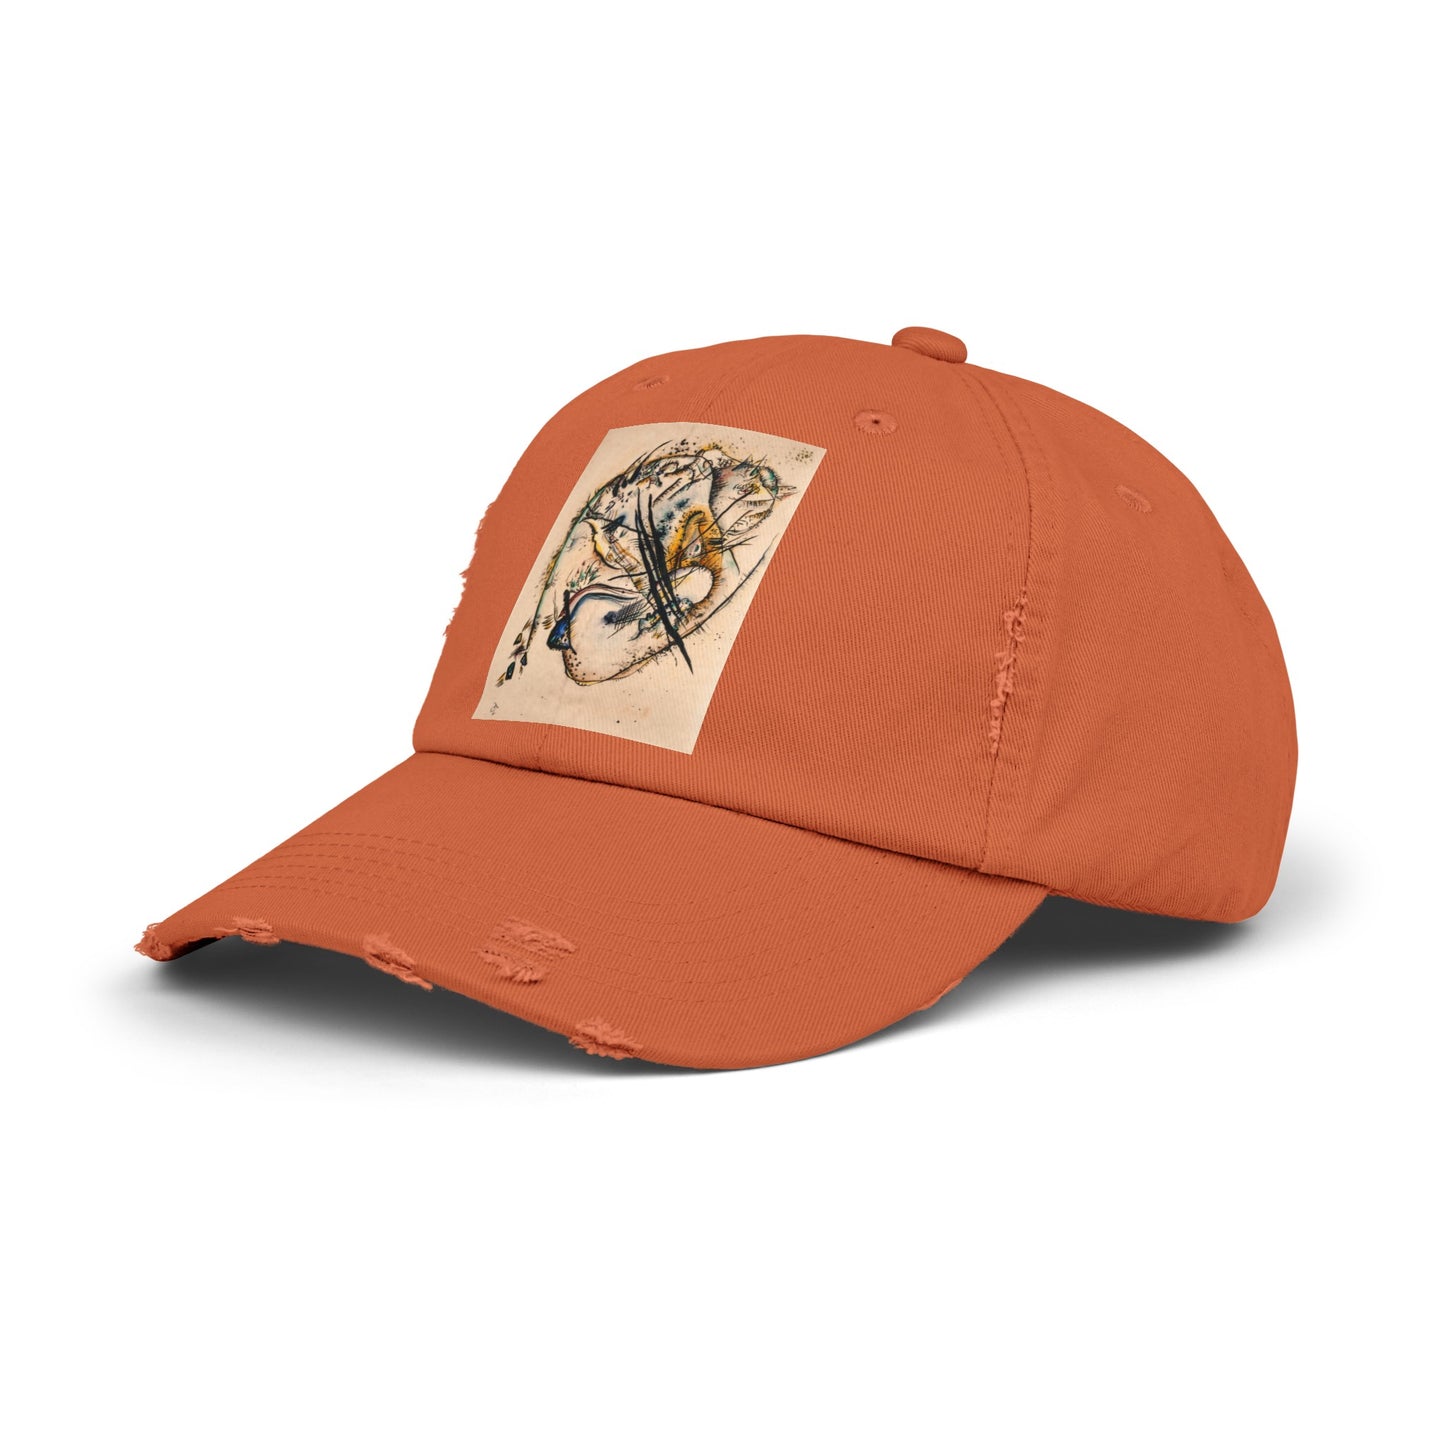 an orange hat with a picture of a bird on it